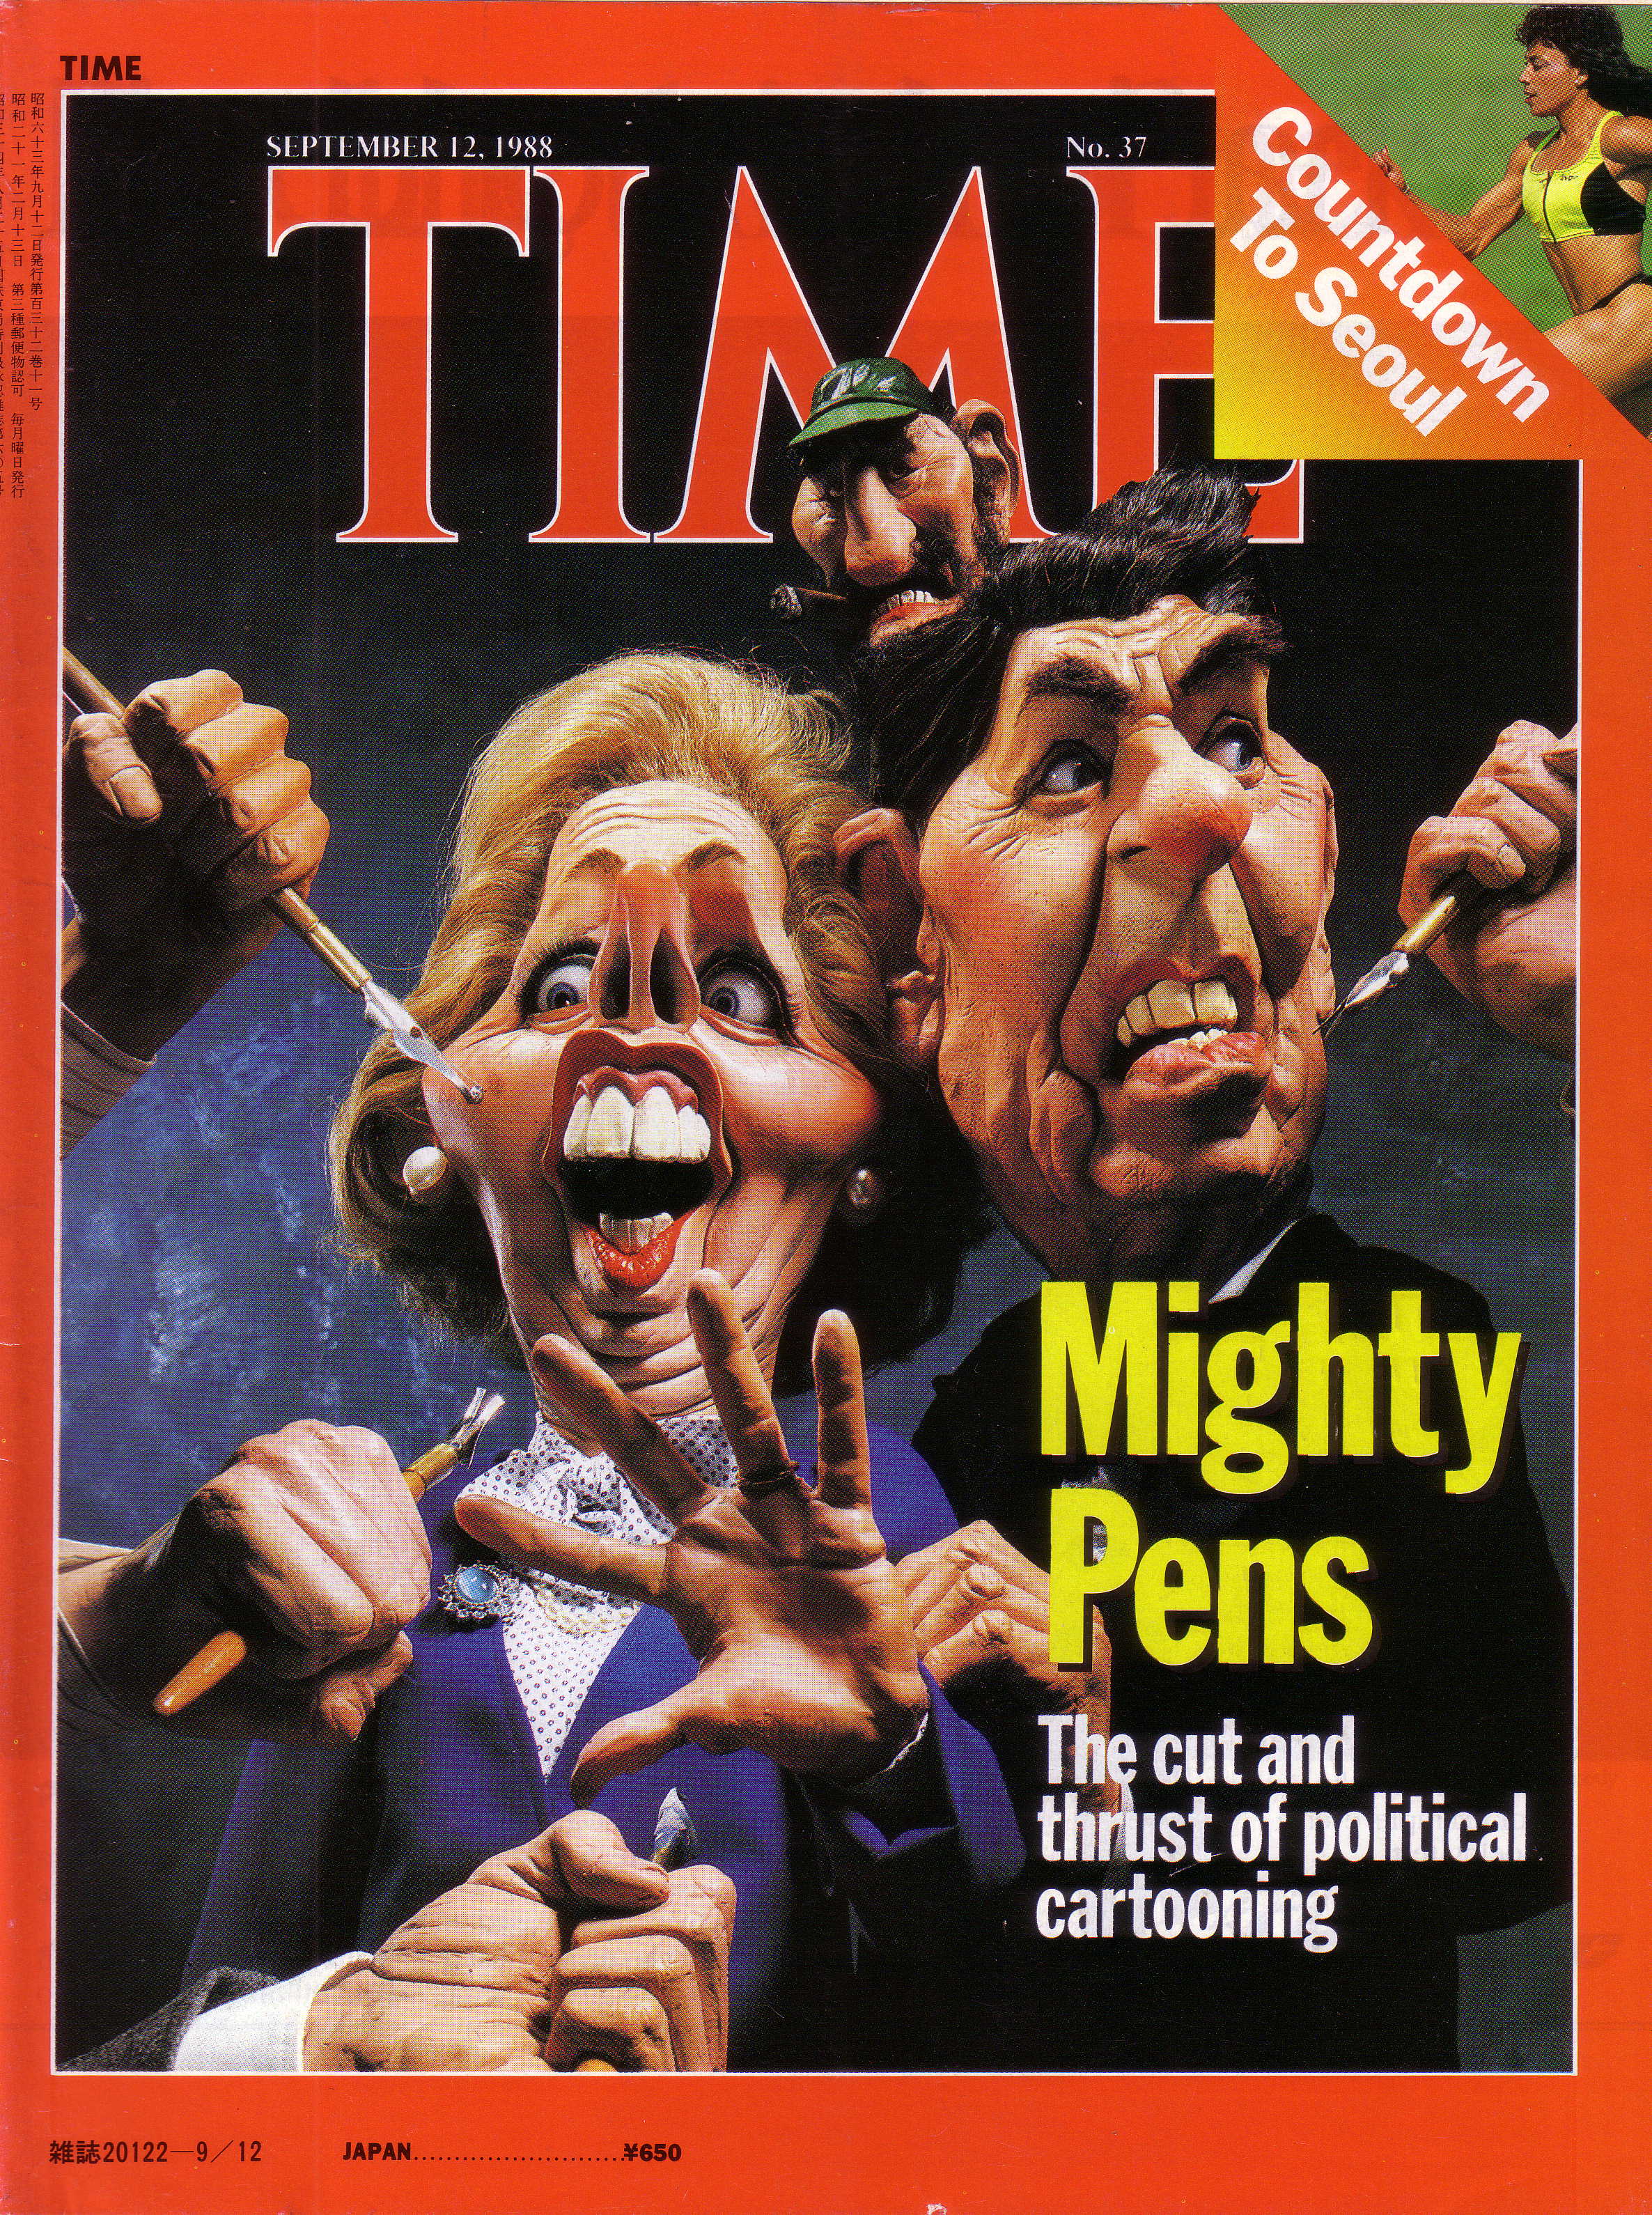 Thatcher and Reagan Time mag. cover 1988